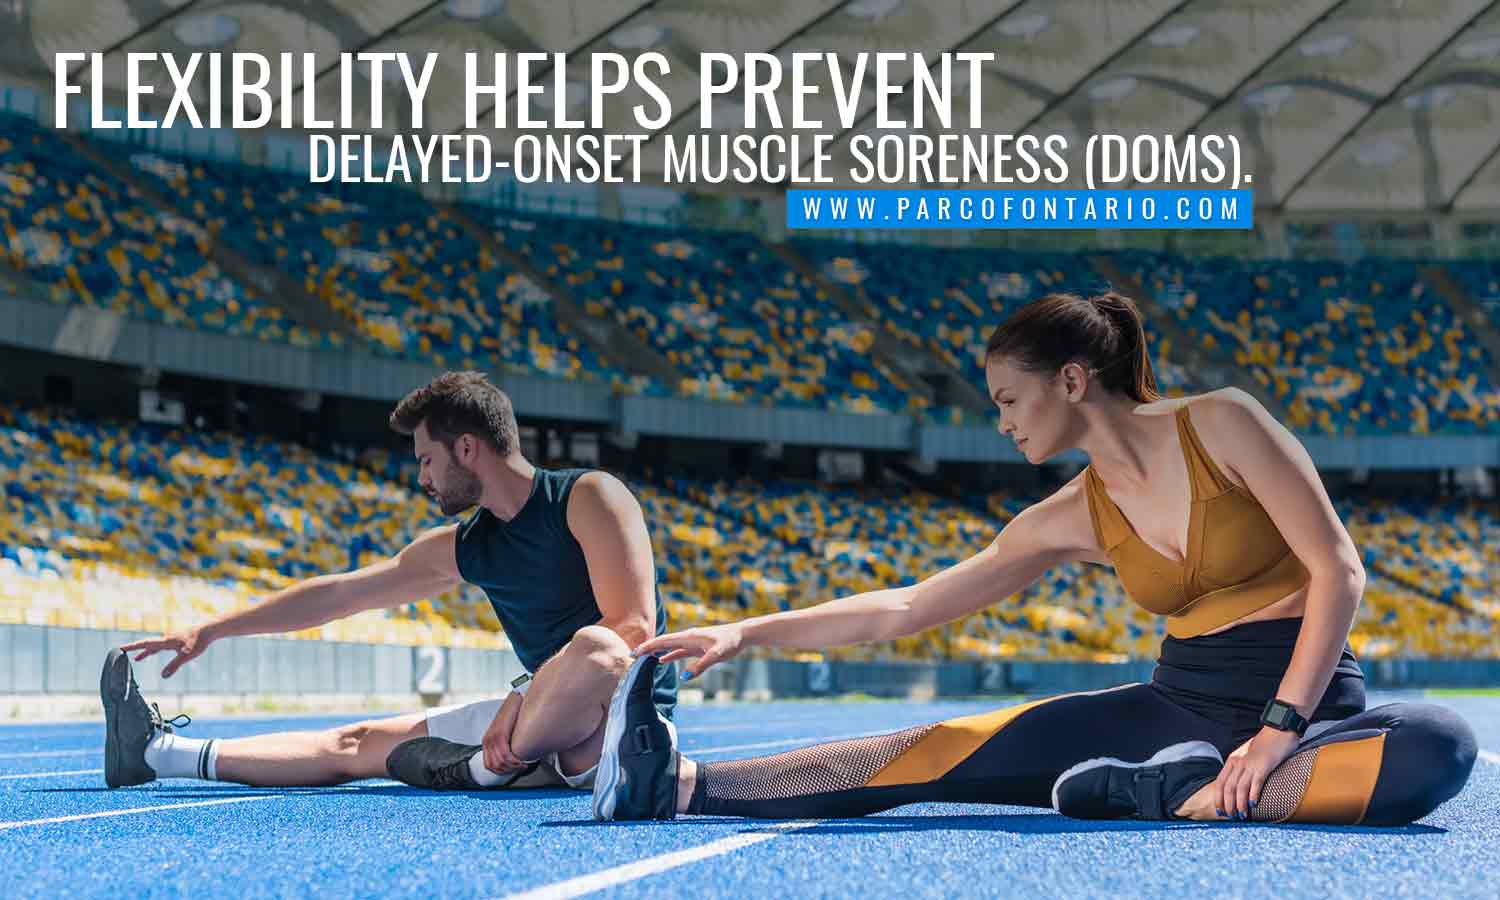 Flexibility helps prevent delayed-onset muscle soreness (DOMS)